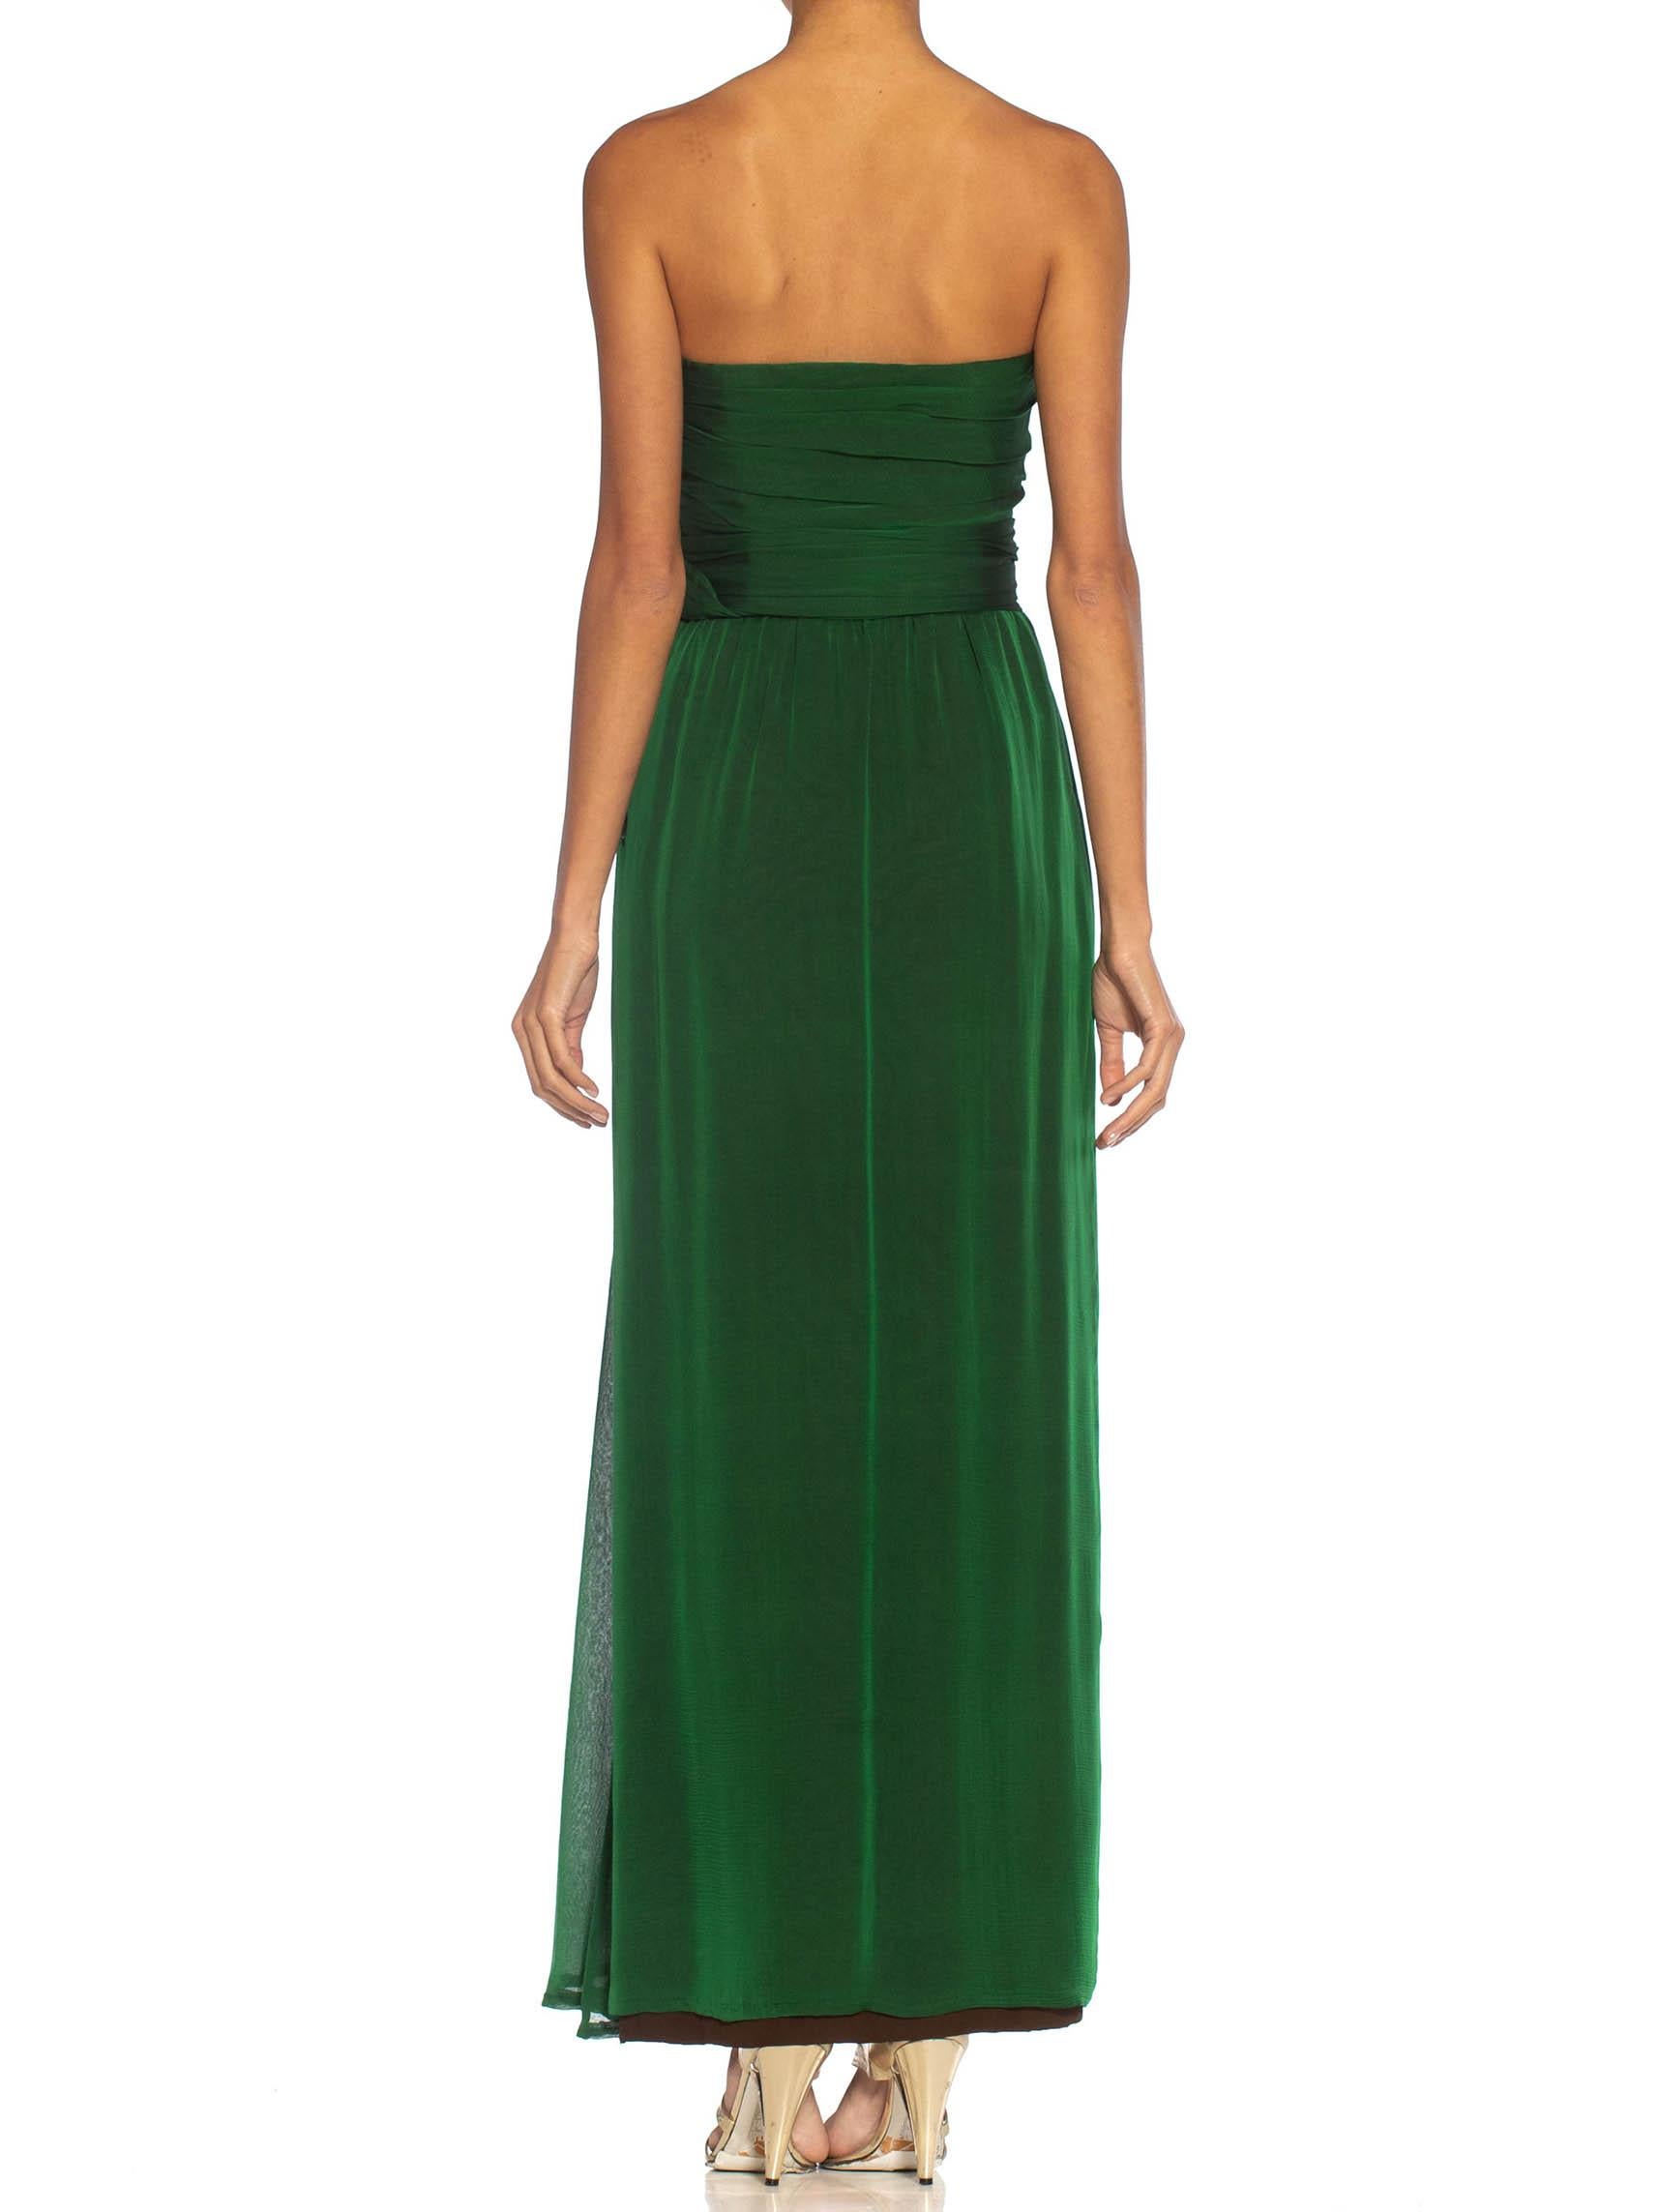 1980S YVES SAINT LAURENT Blue & Green Haute Couture Silk Chiffon Strapless Gown For Sale 2